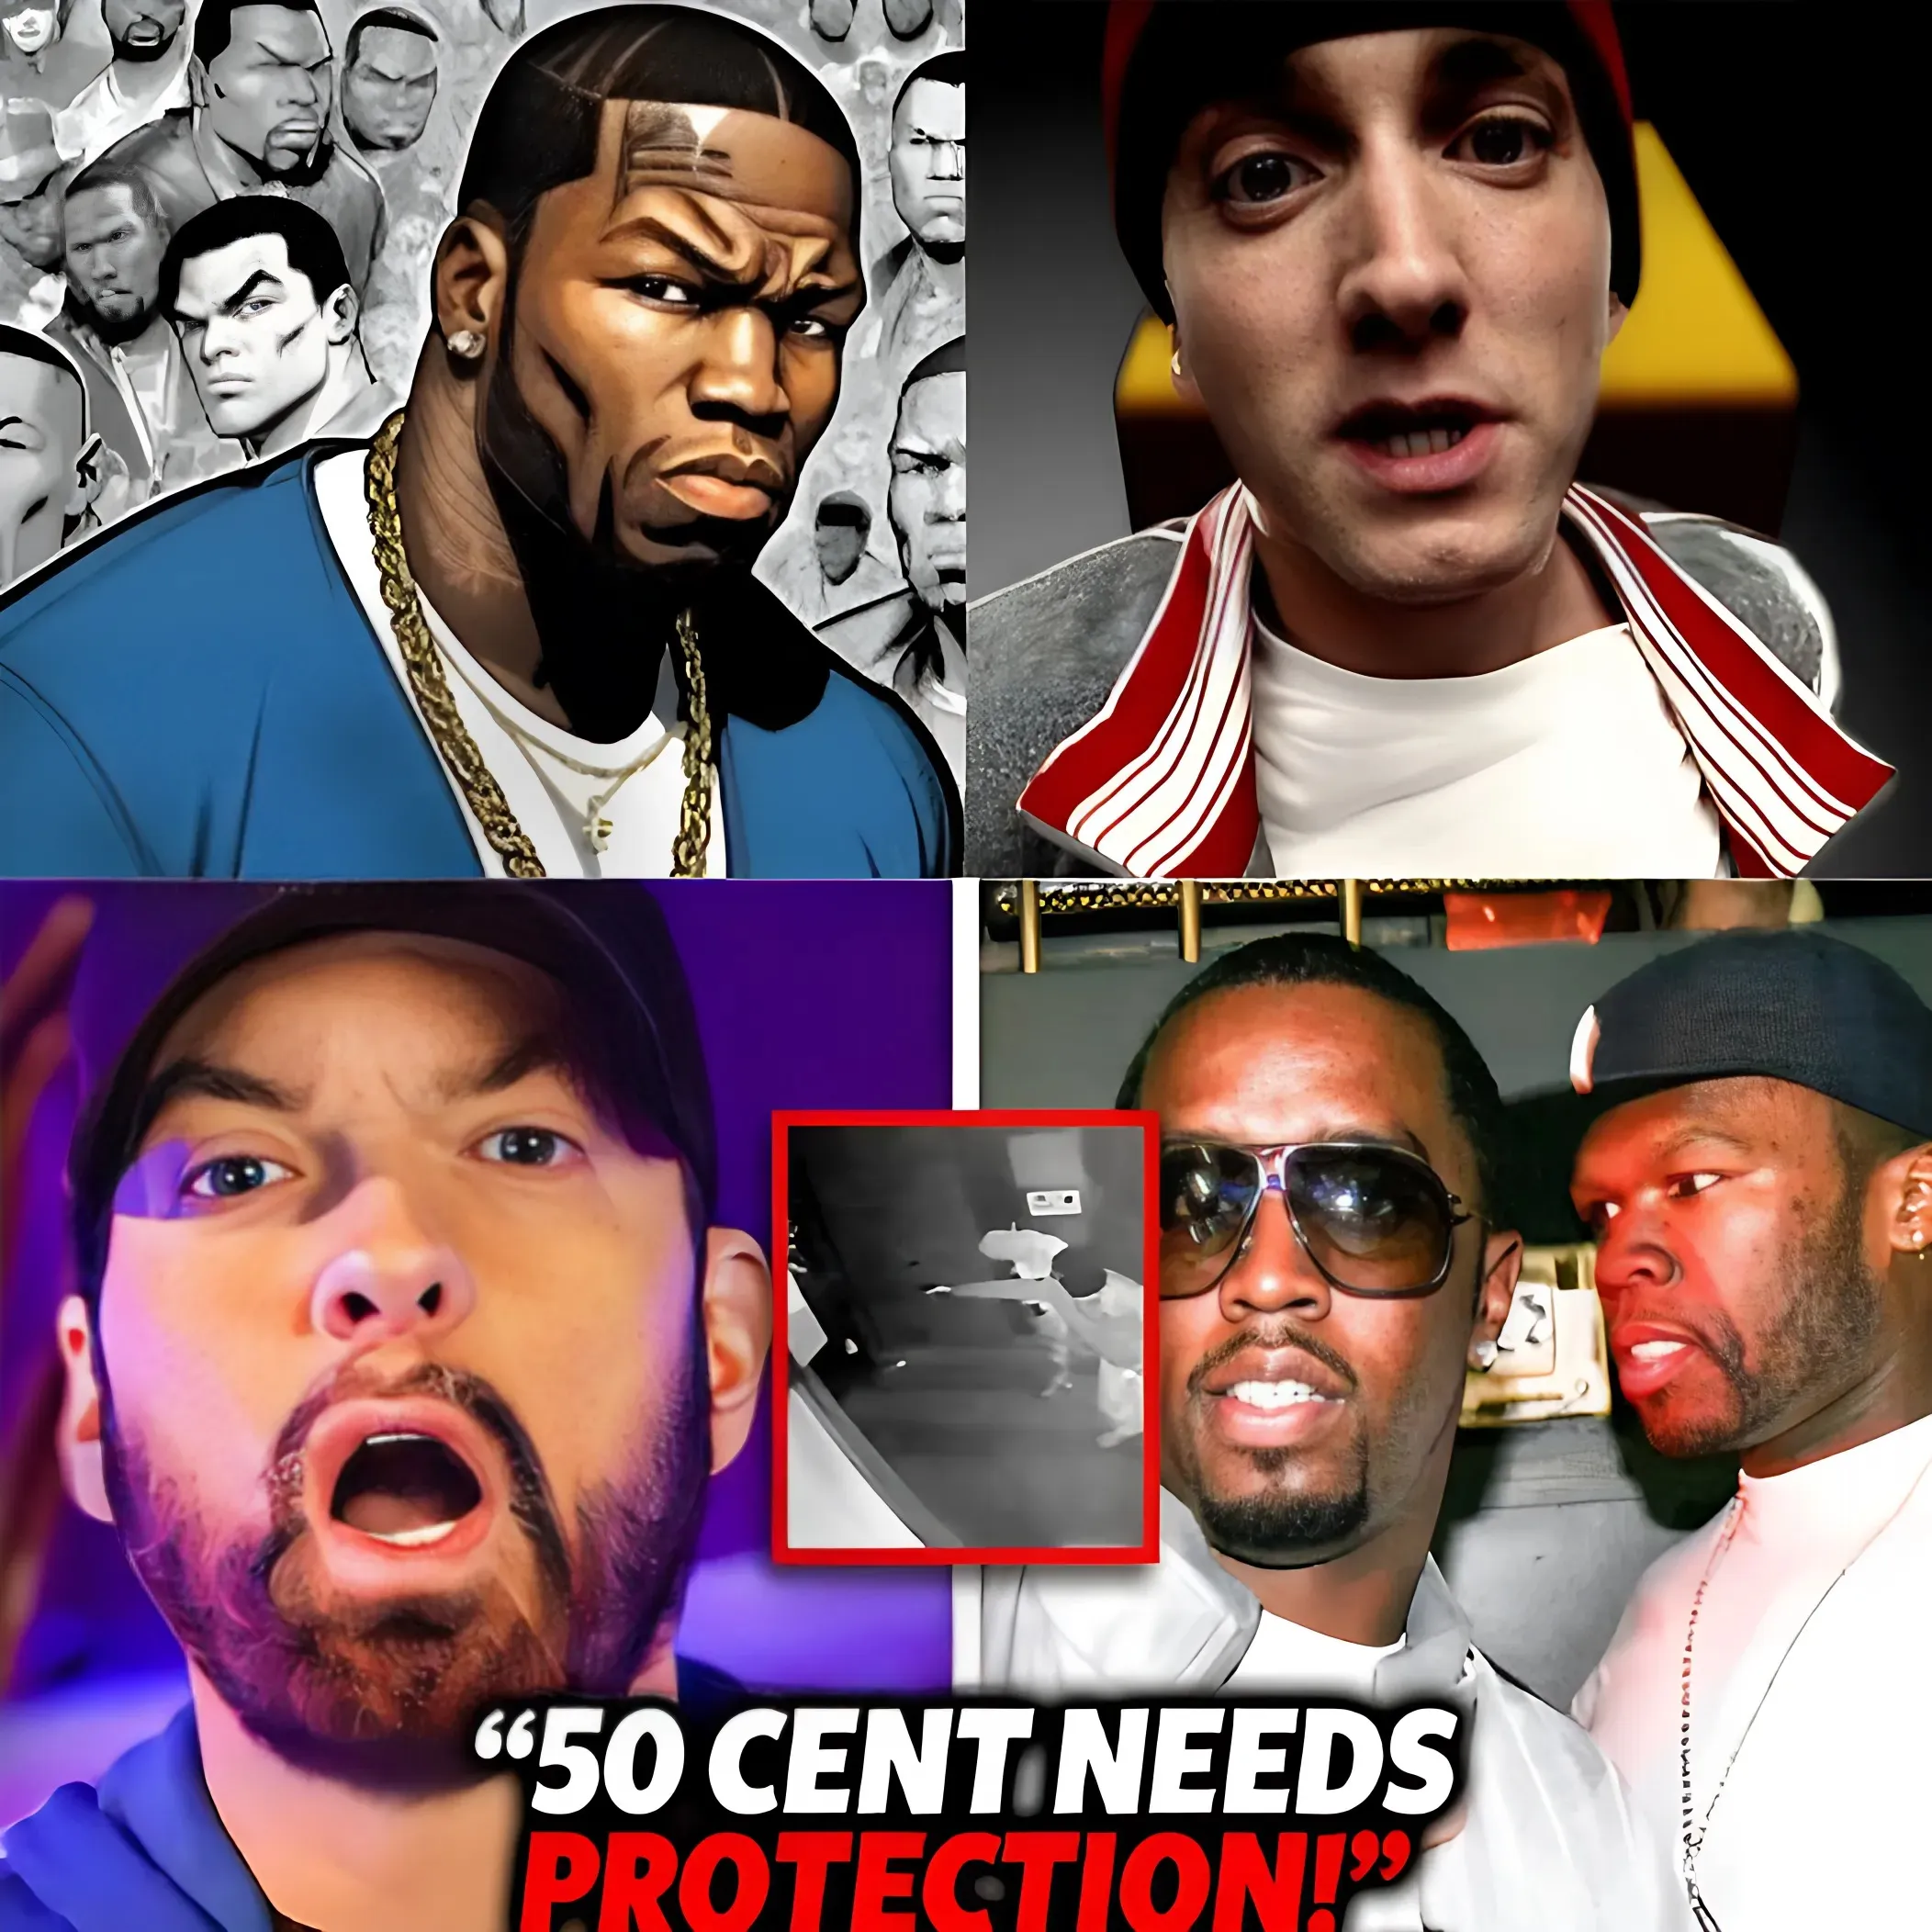 “I’ll Come For You!” Eminem WARNS Diddy About Eliminating 50 Cent.